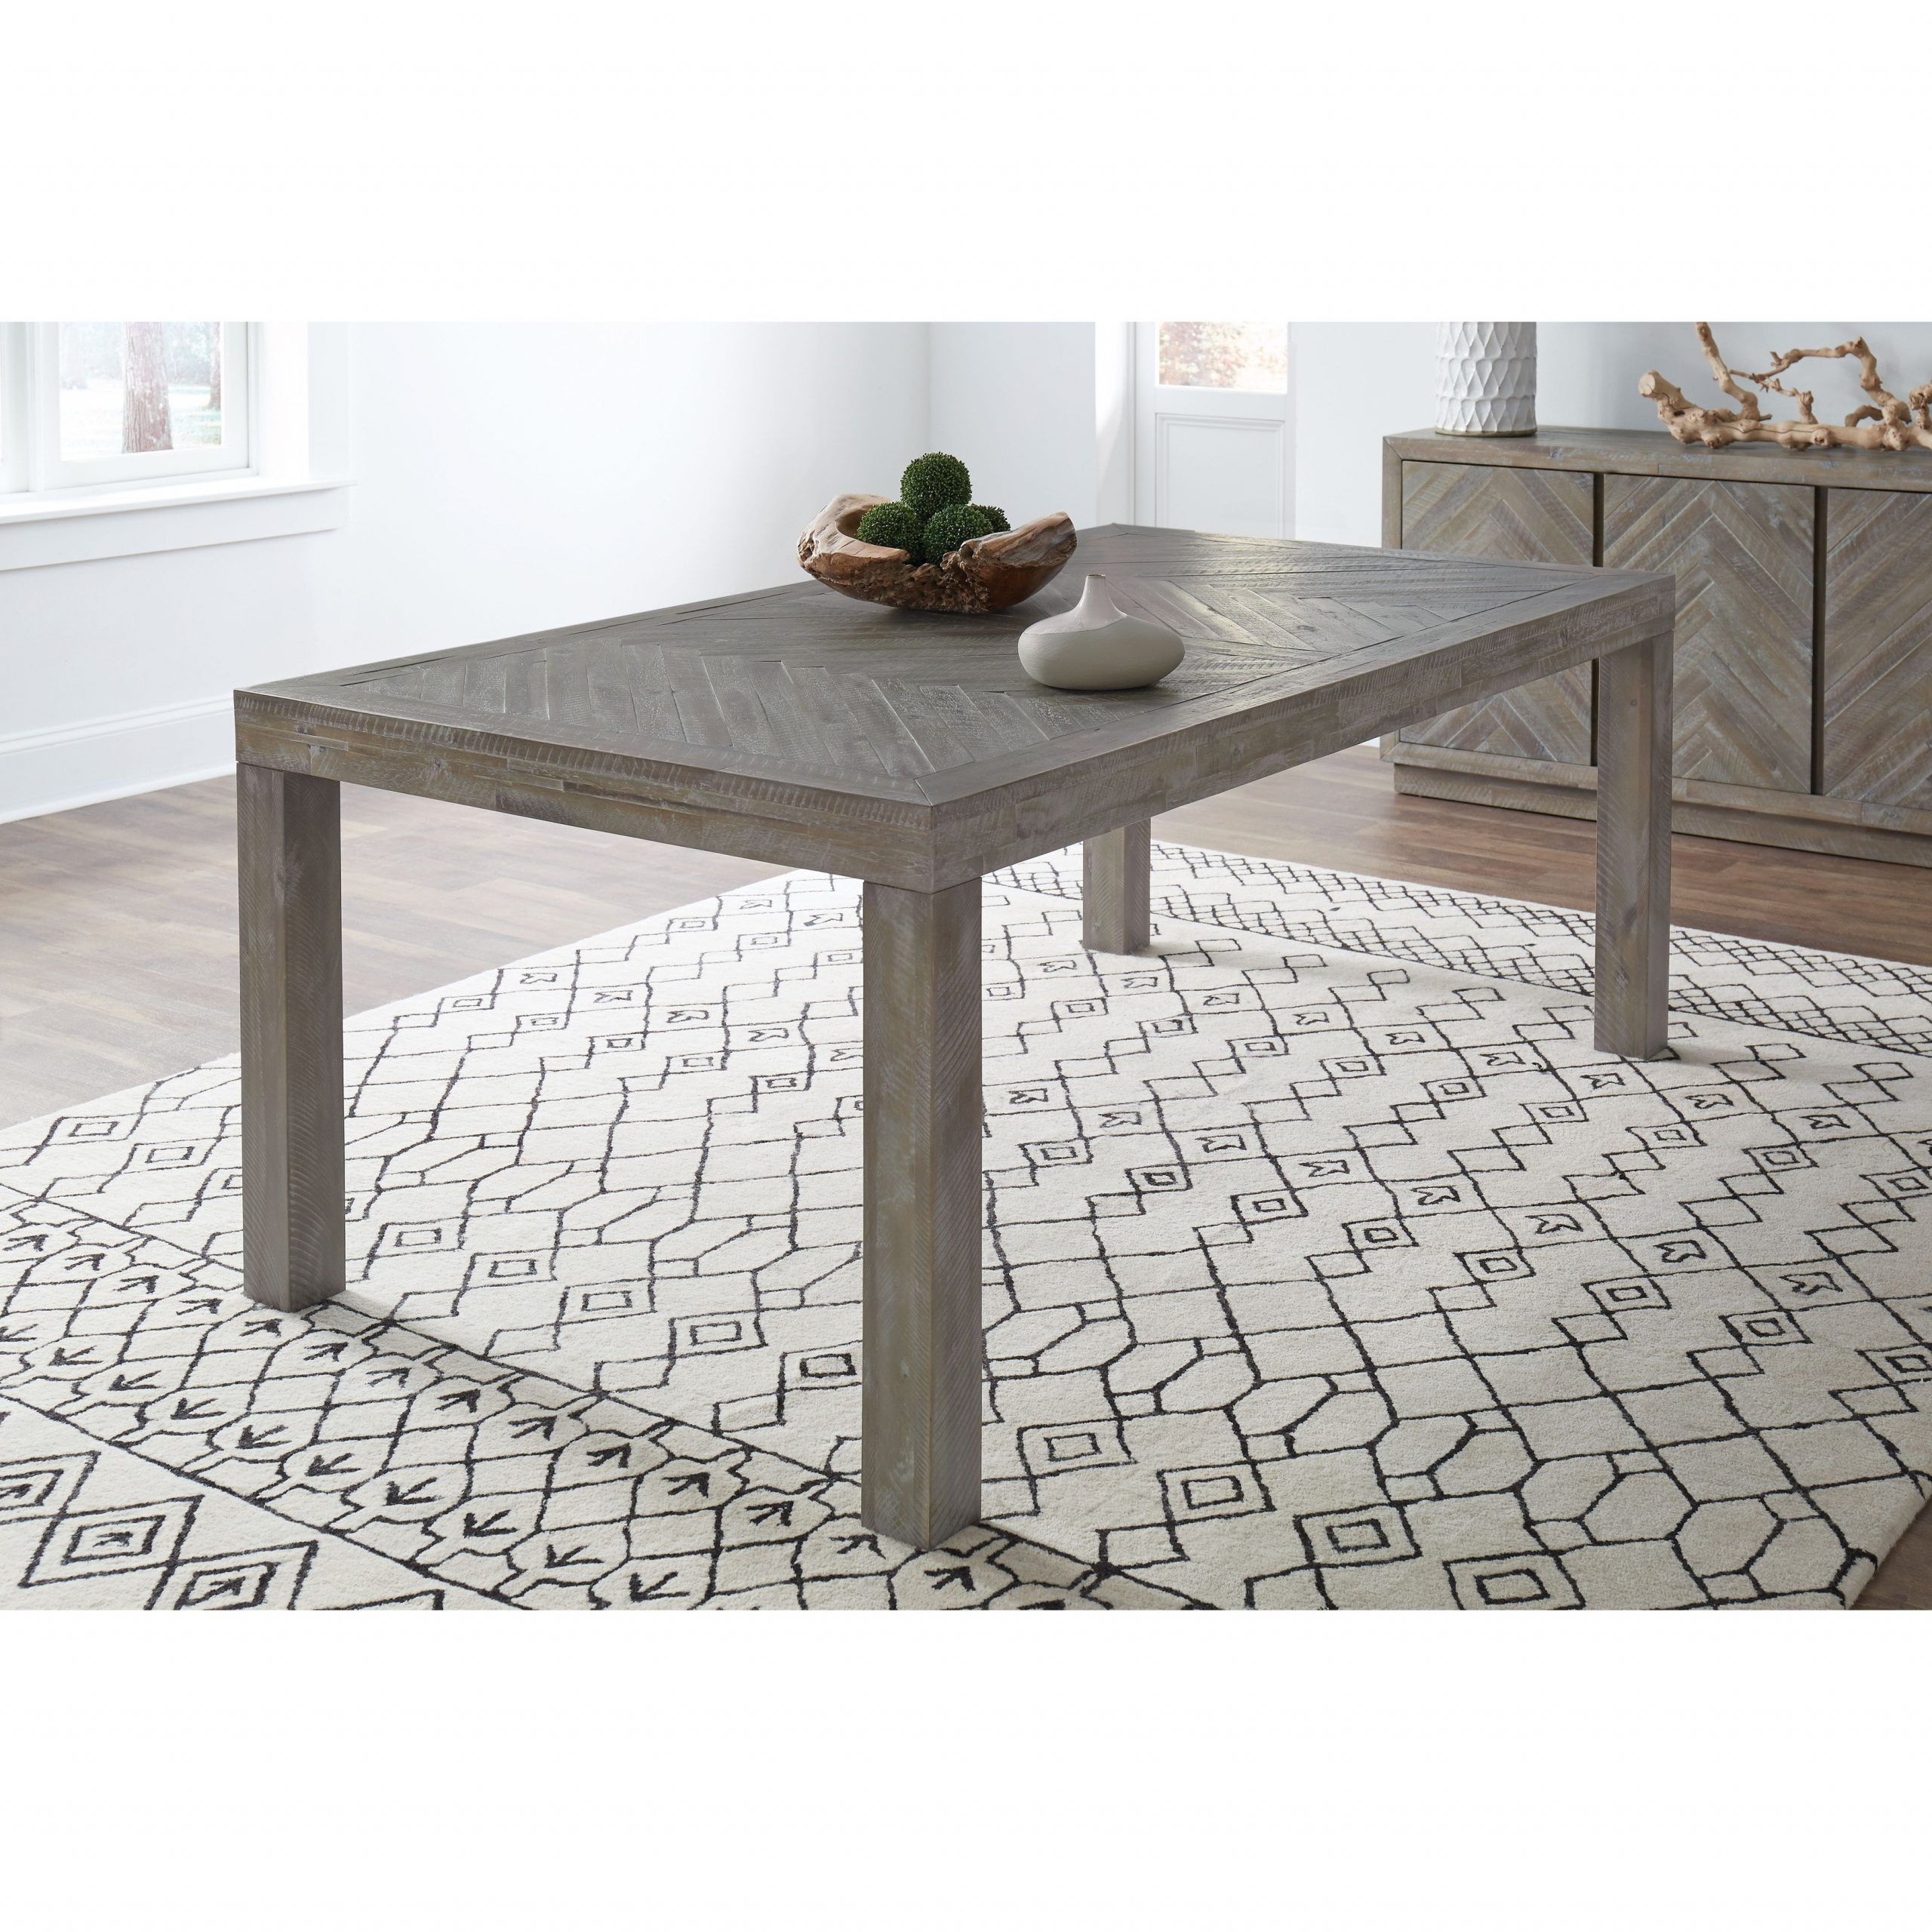 The Gray Barn Morning Star Solid Wood Rectangular Dining Table In Rustic  Latte With Regard To Most Recent Menlo Reclaimed Wood Extending Dining Tables (View 5 of 25)